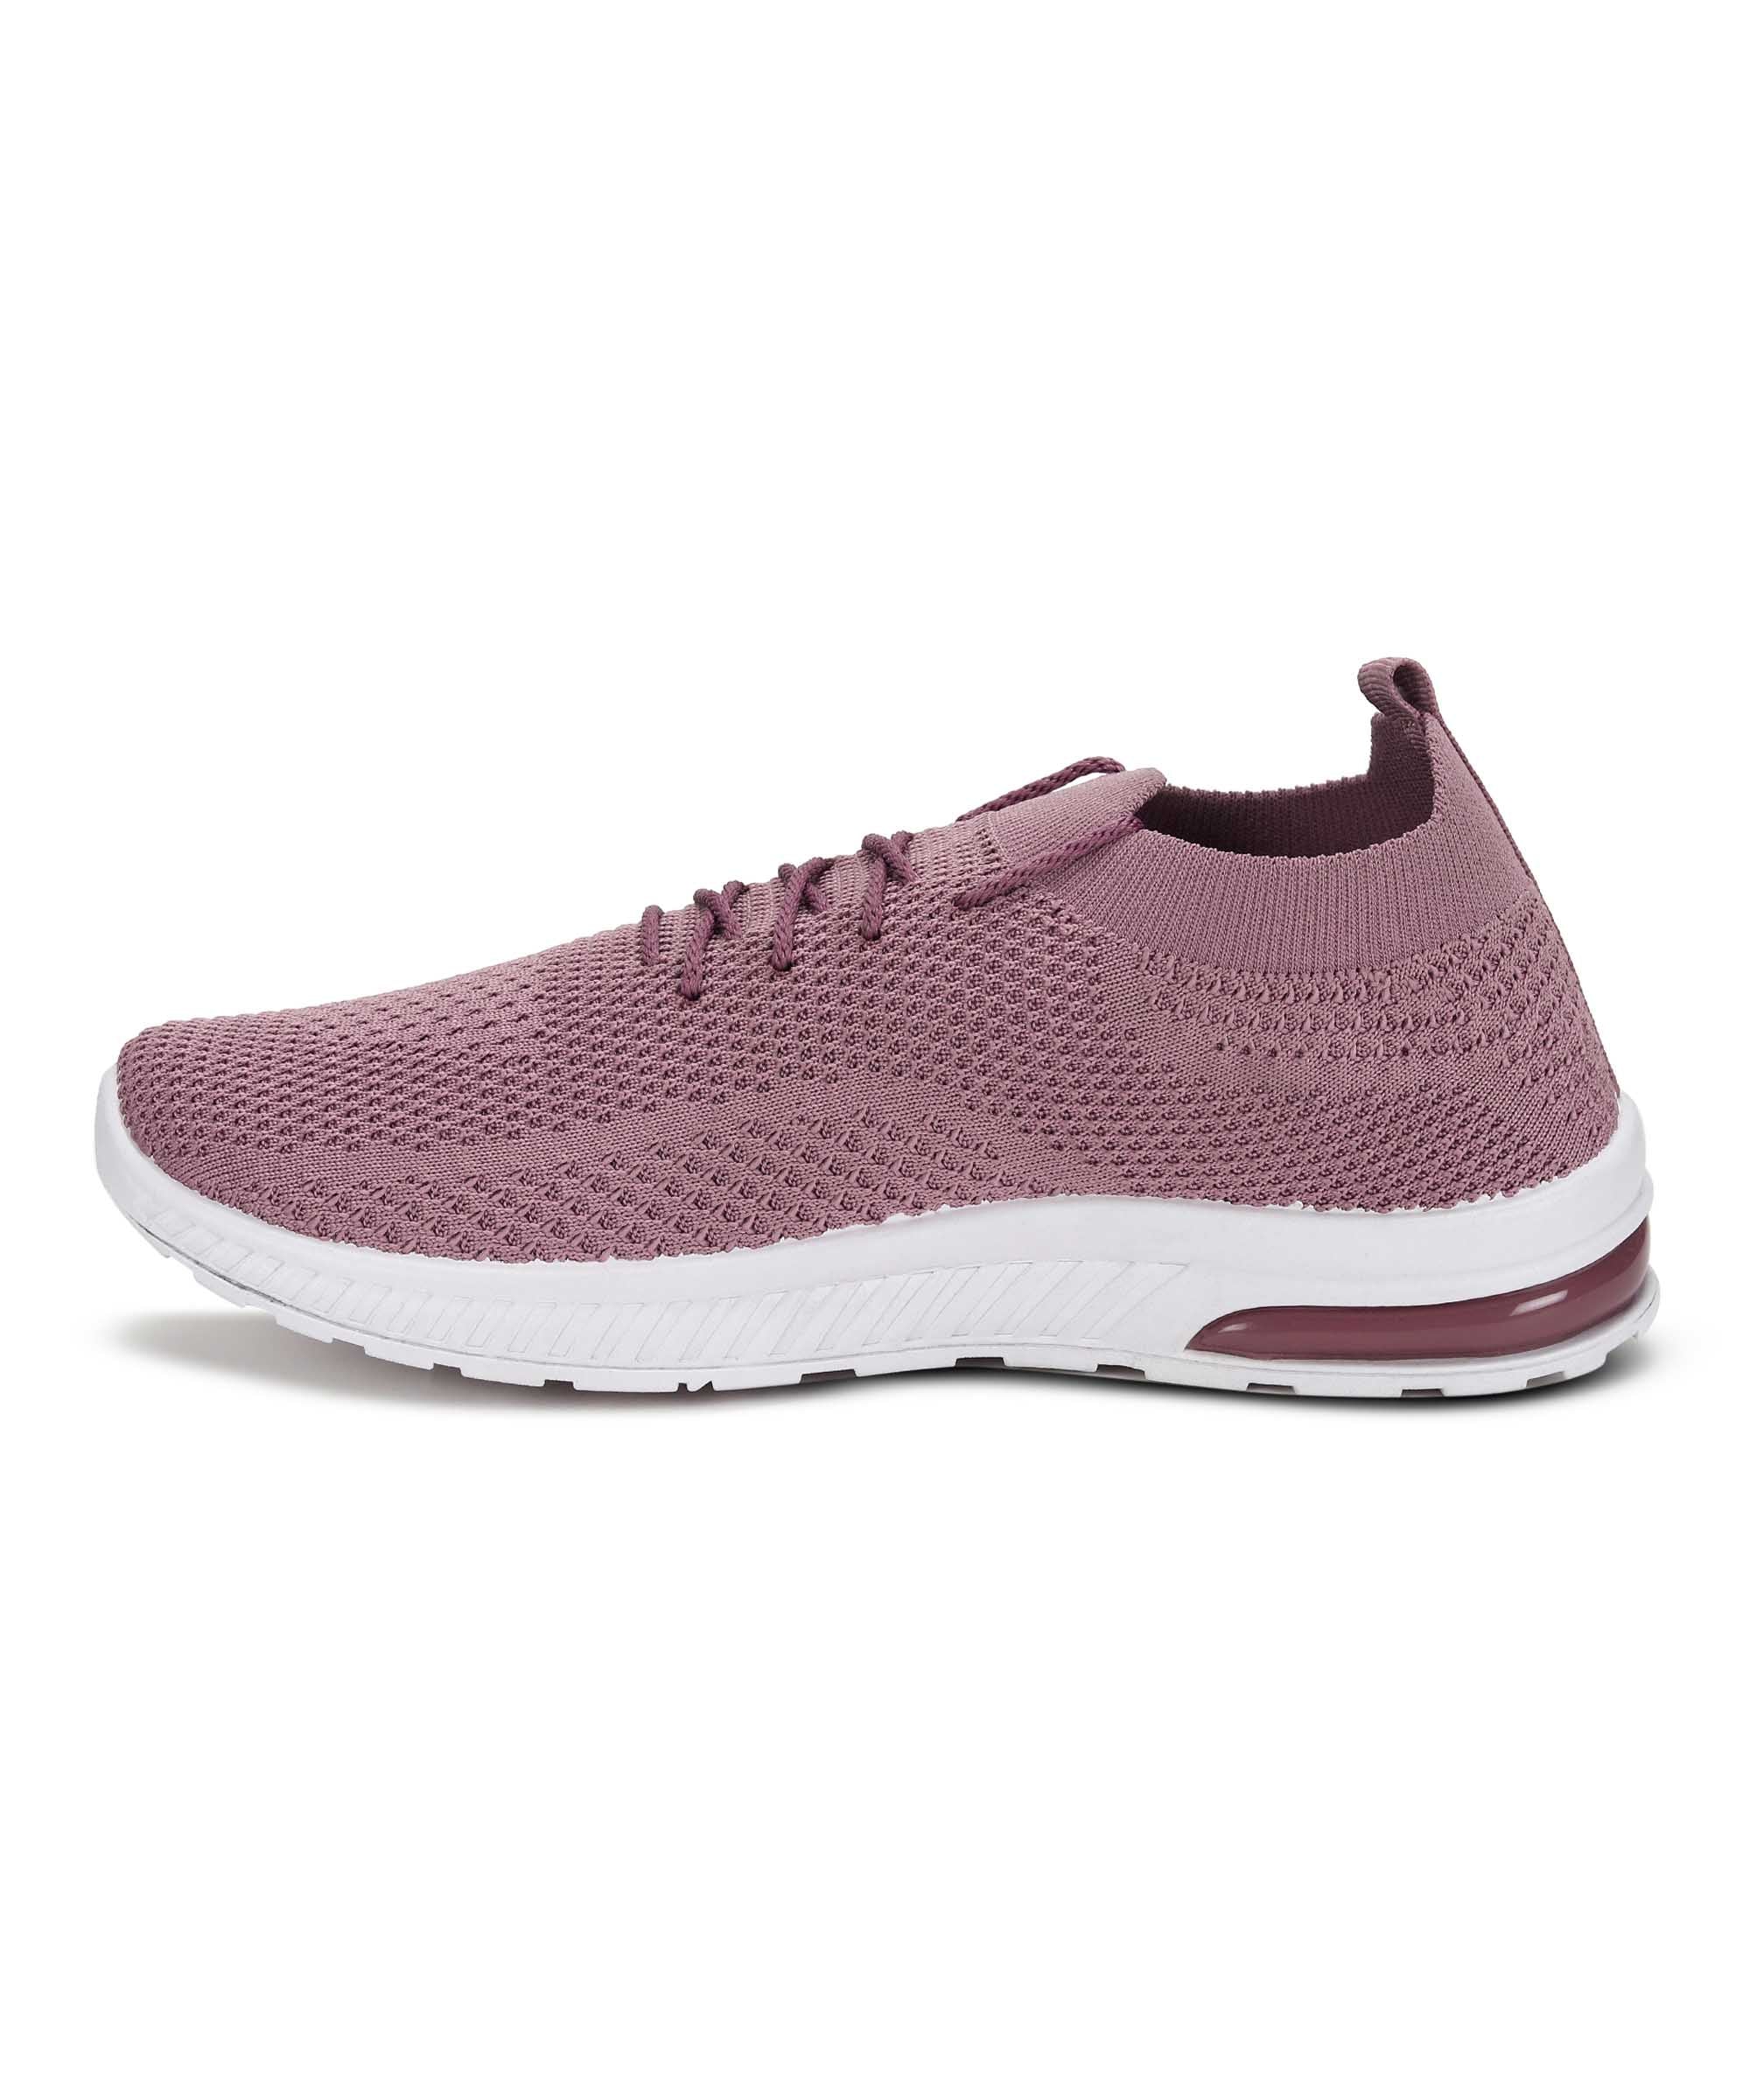 Paragon K1016L Women Sports Shoes | Walking Running Gym Shoes | Breathable Comfortable Sole with Cushioning